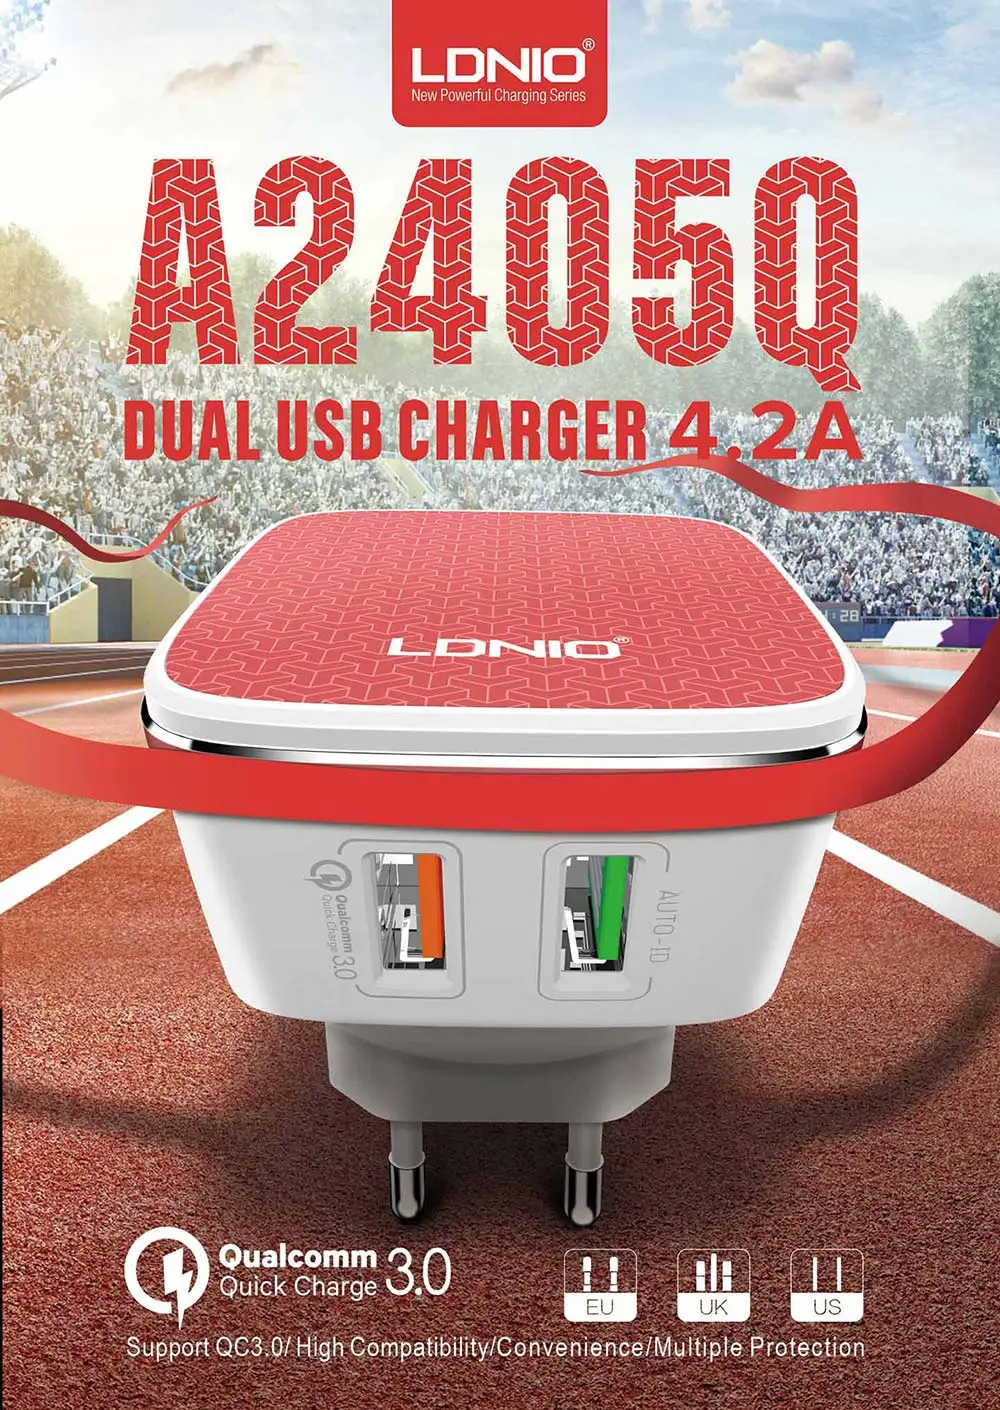 LDNIO mobile dual usb charger 5V 4.3A Quick Charge Universial QC 2.0 usb charger A2405Q